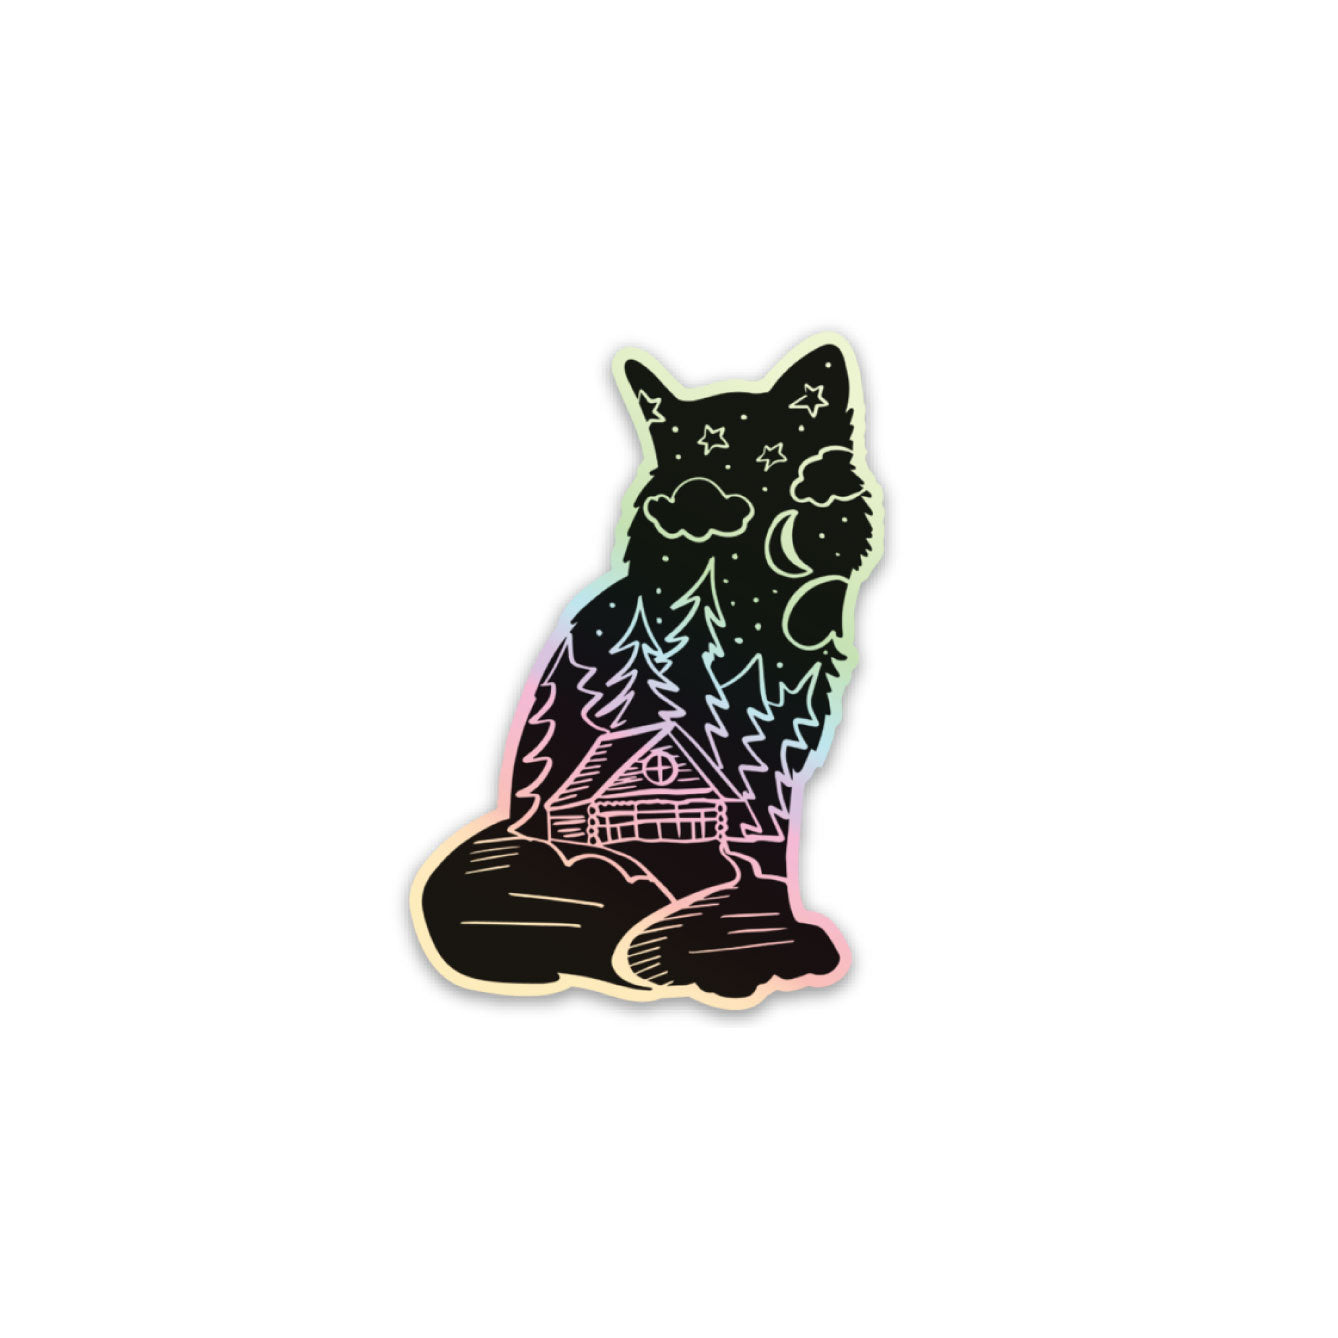 Outdoorsy Fox Holographic Sticker